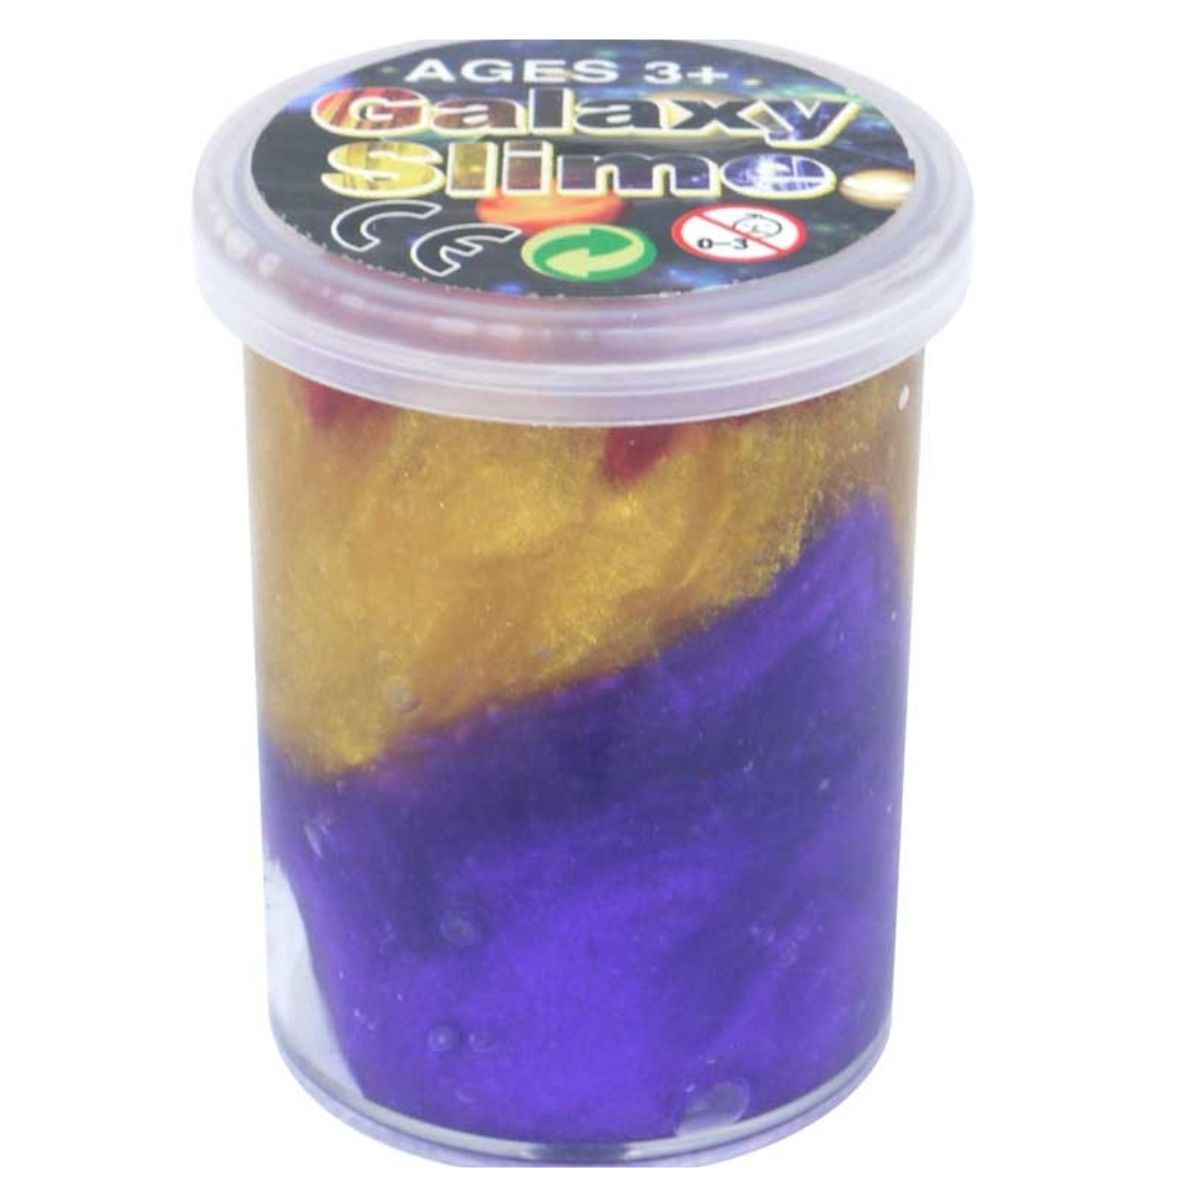 Galaxy - Slime - 1pcs in a plastic container.